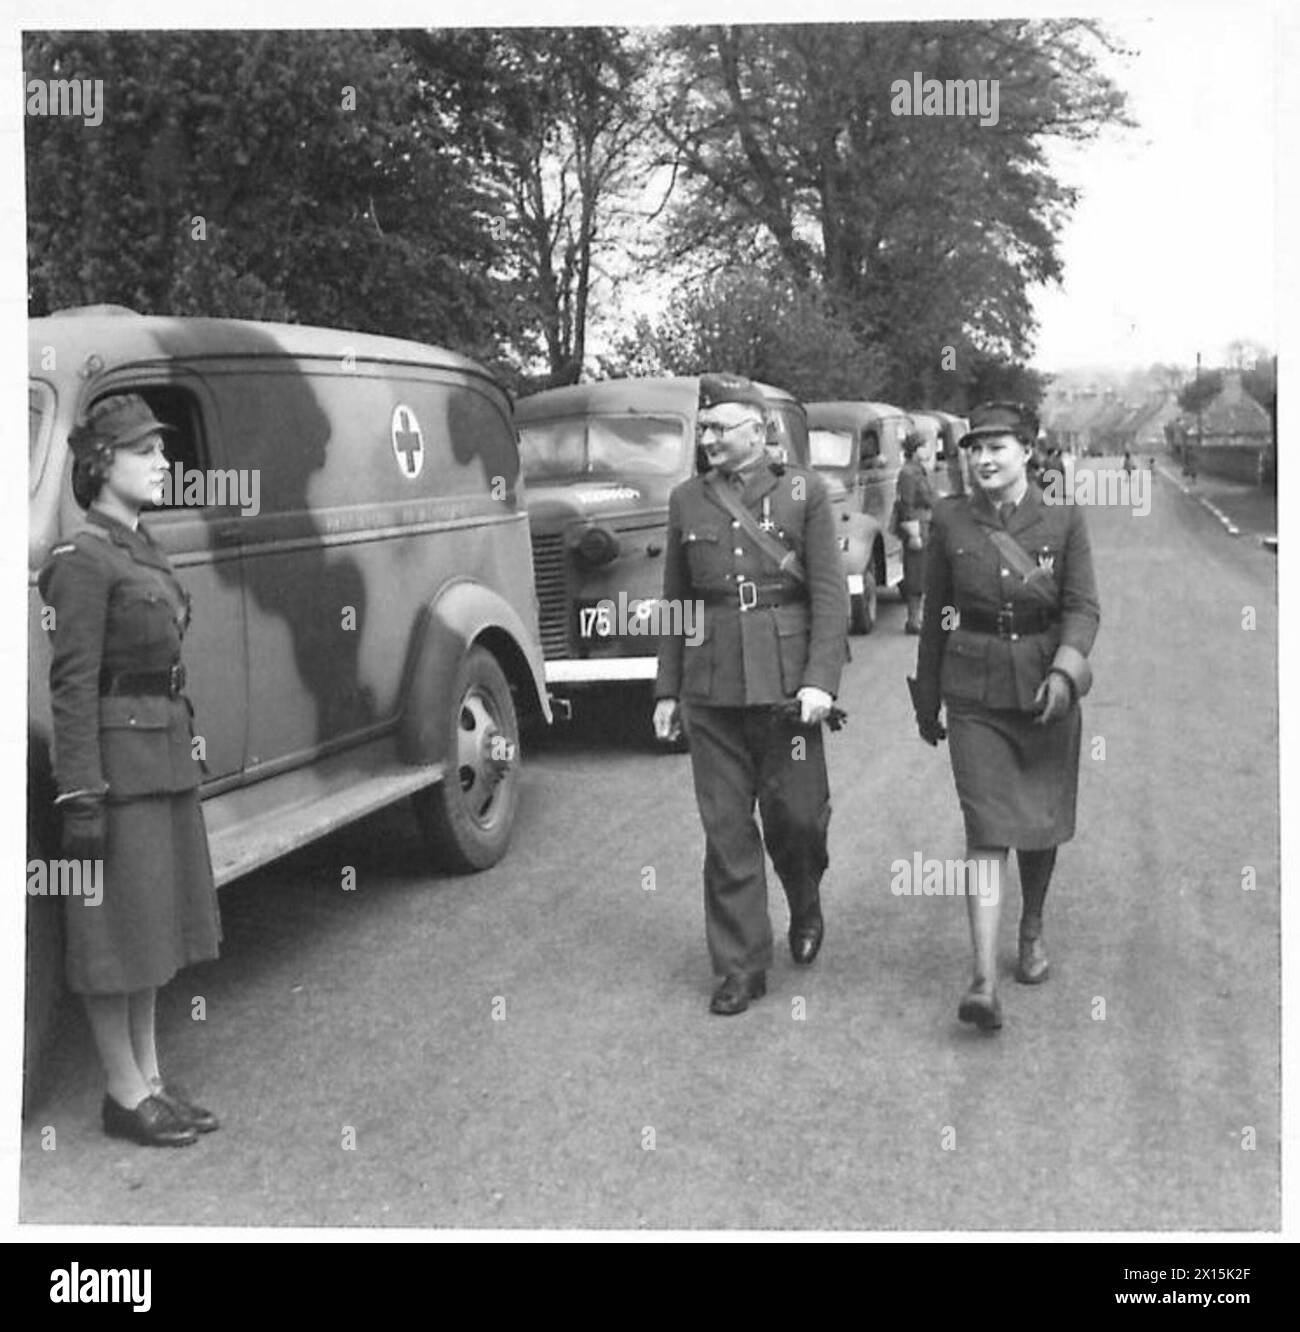 THE POLISH ARMY IN BRITAIN, 1940-1947 - Diana Napier was a well known actress and wife of Richard Tauber, the Austrian-born opera singer, in her private life. Diana Napier, a section commander of the First Aid Nursing Yeomanry (FANY) unit attached to the 1st Polish Corps, inspecting ambulances with the 1st Corps' Medical Officer at Cupar, 1 June 1941.The unit was presented with 62 ambulances from the USA in last 10 months. Mrs Napier was a creator of this medical unit and a first ambulance was a gift from her British Army, British Army, First Aid Nursing Yeomanry, Polish Army, Polish Armed For Stock Photo